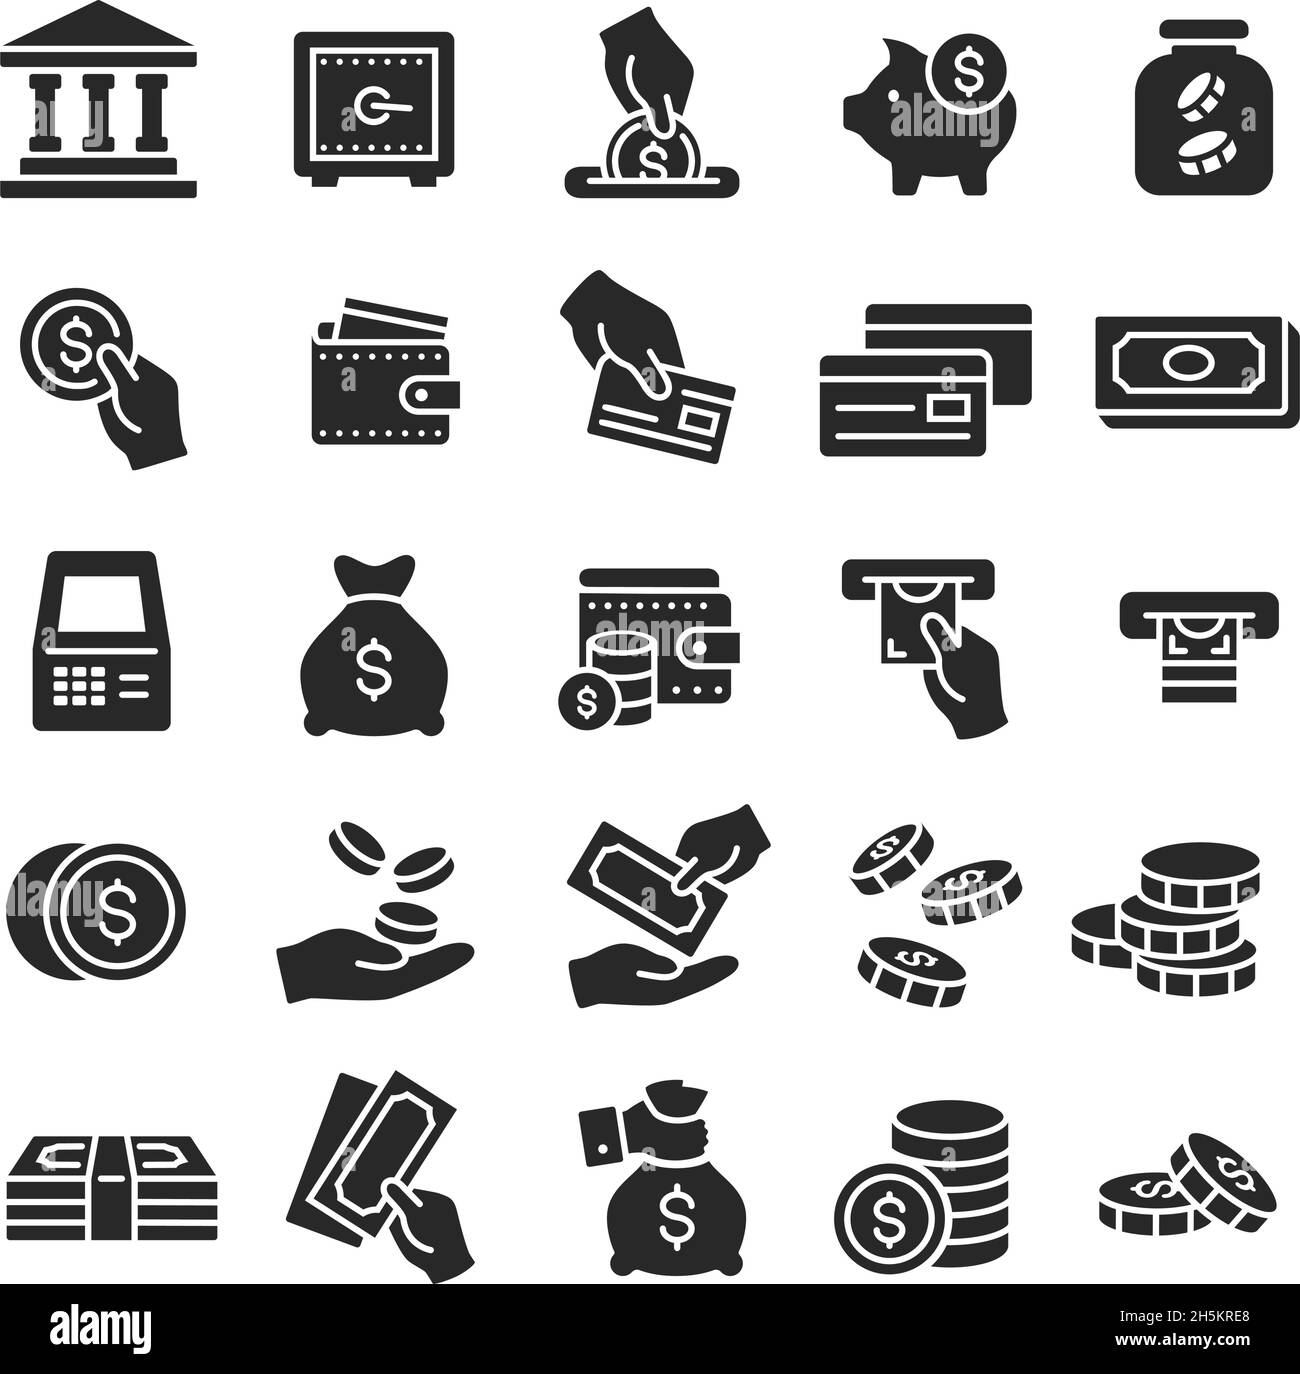 Money icons, financial business, finance, bank, savings, payment icon. Dollar bills, banknotes and coins, atm silhouette symbols vector set. Commerce, transfer or investment concept Stock Vector